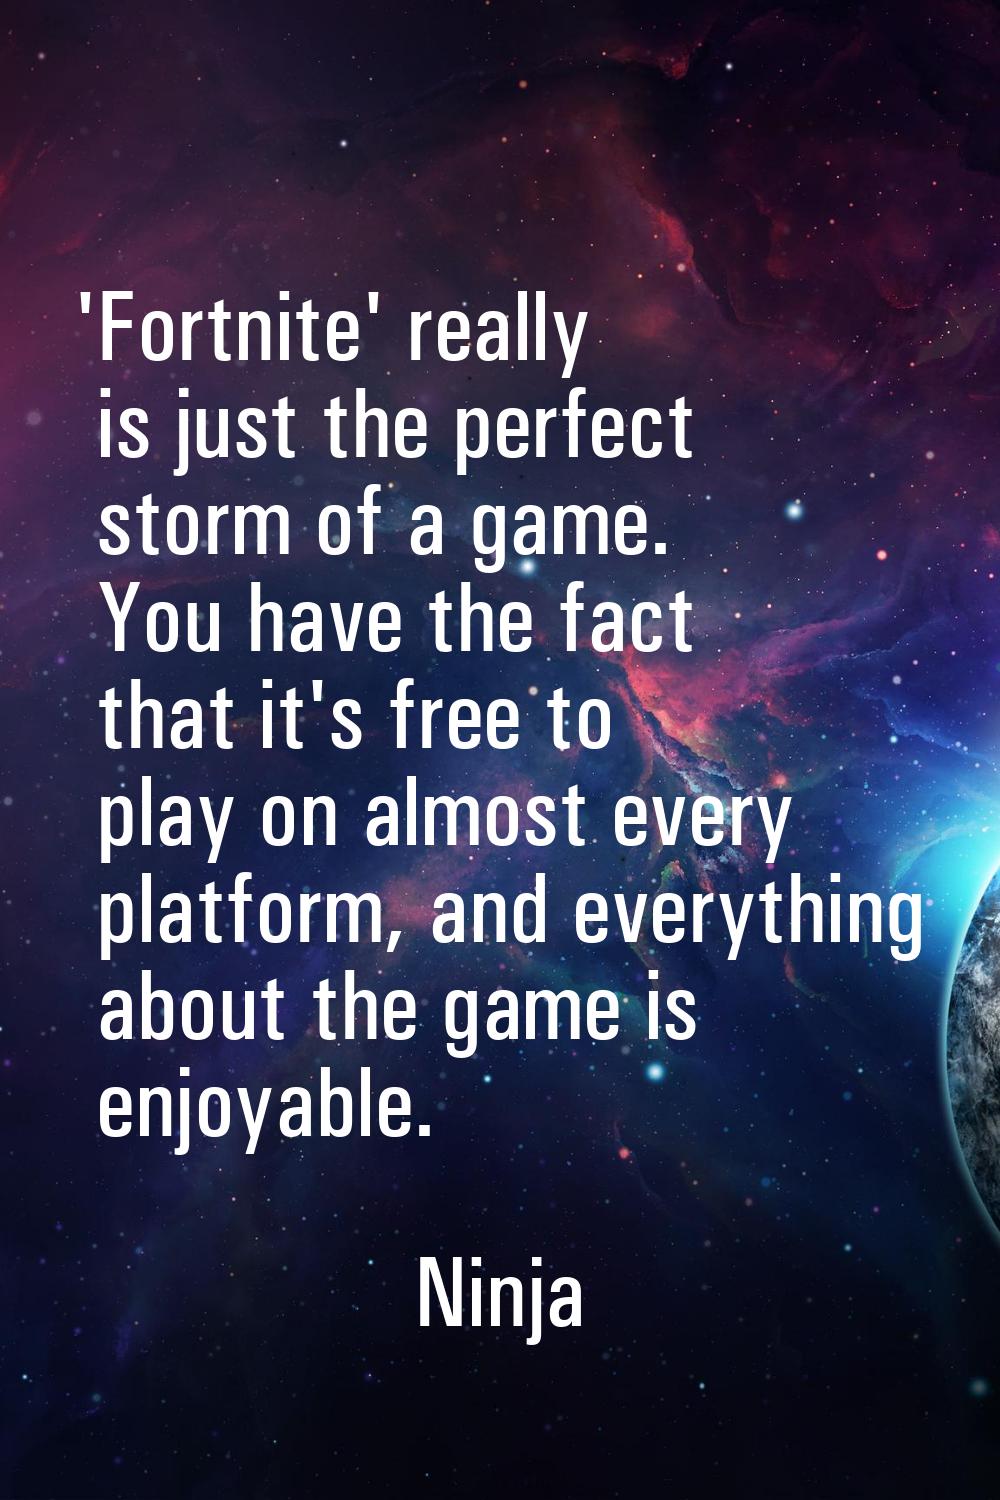 'Fortnite' really is just the perfect storm of a game. You have the fact that it's free to play on 